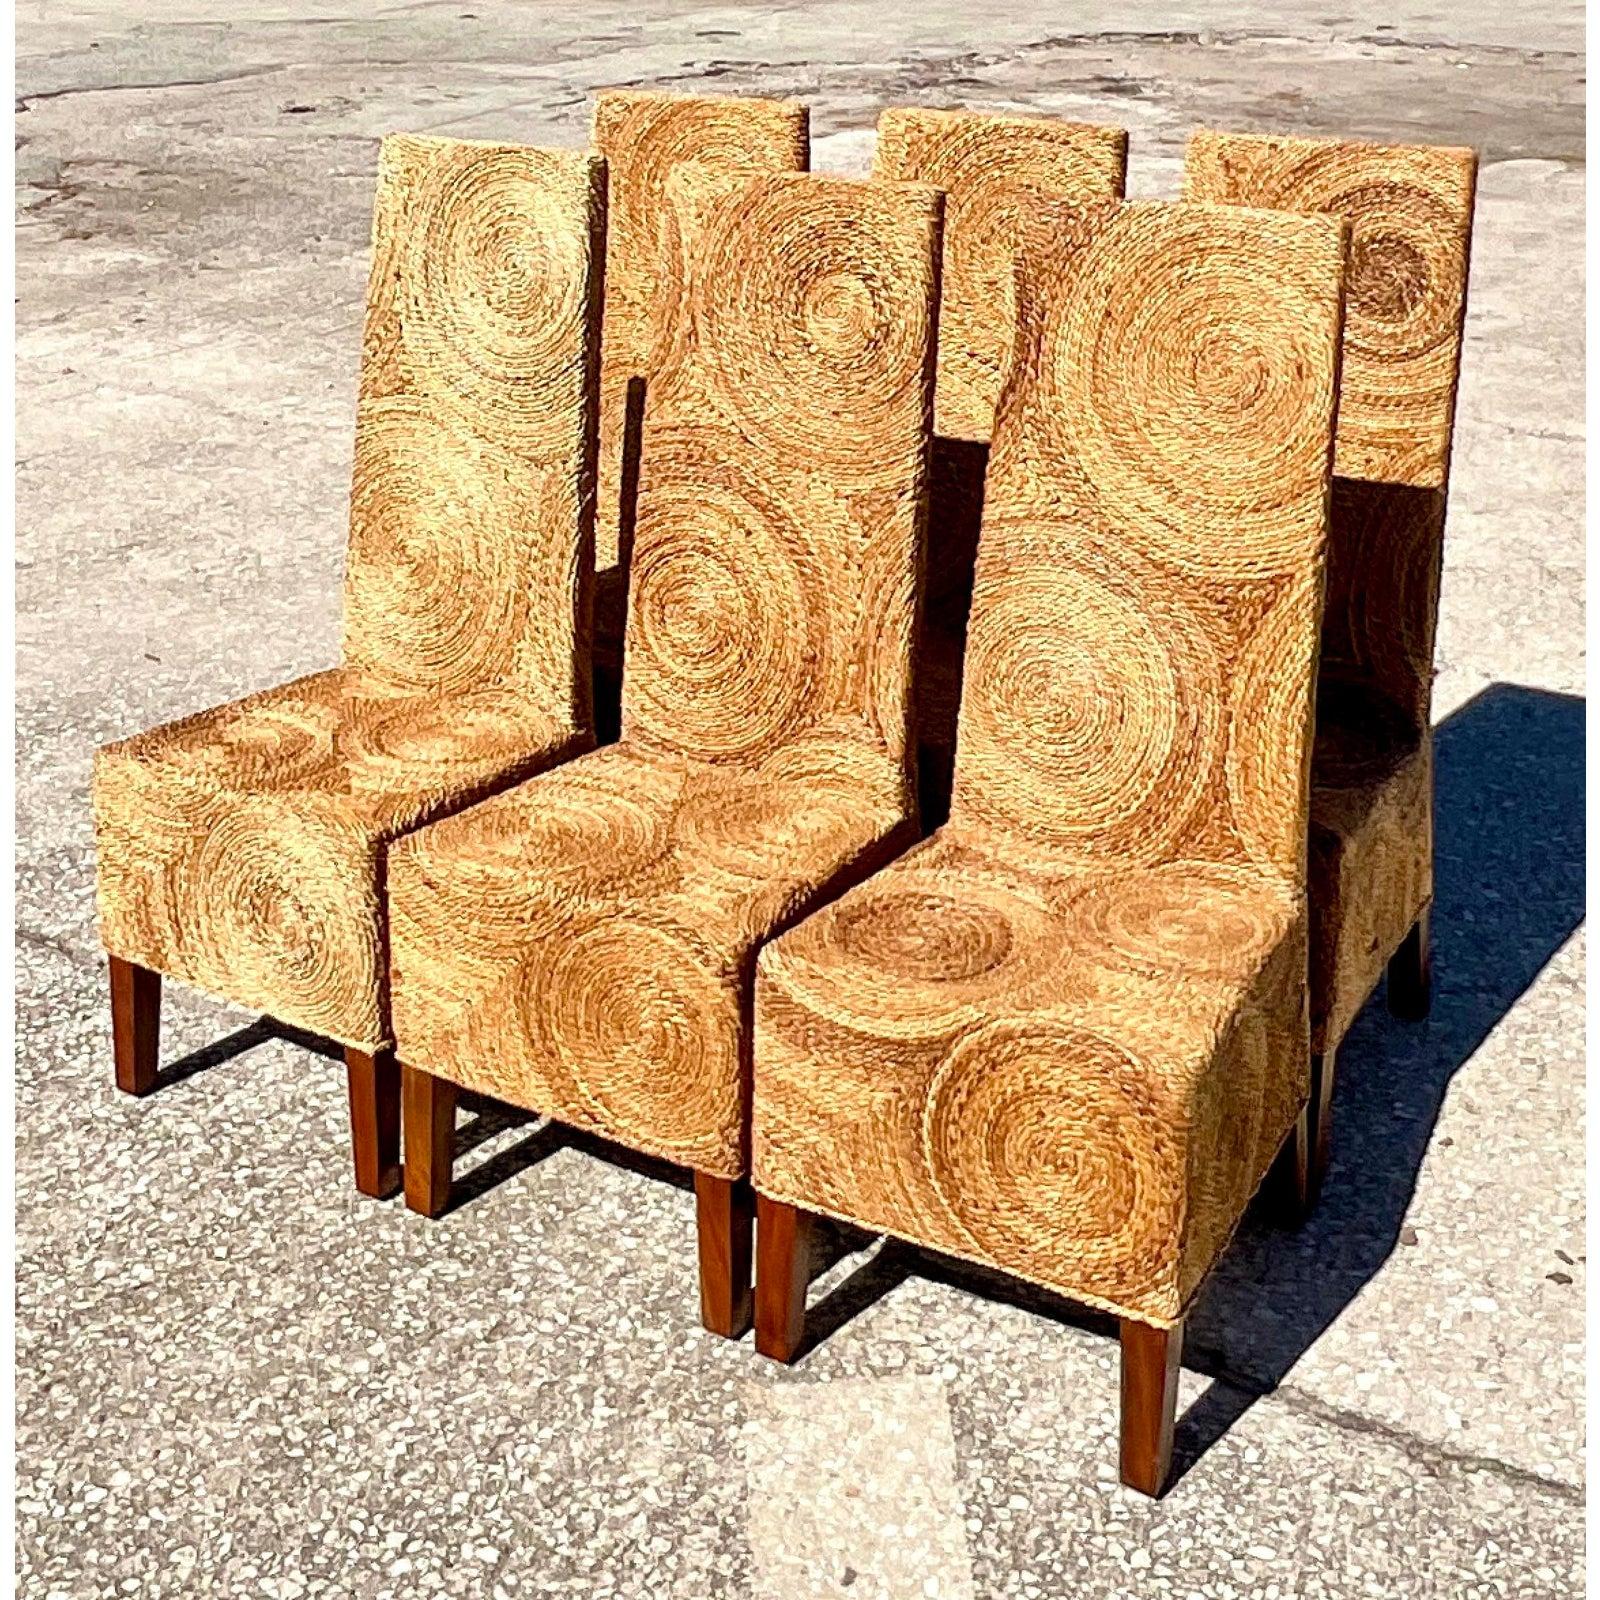 Vintage Coastal Twisted Rattan Circles Dining Chairs - Set of 6 For Sale 1